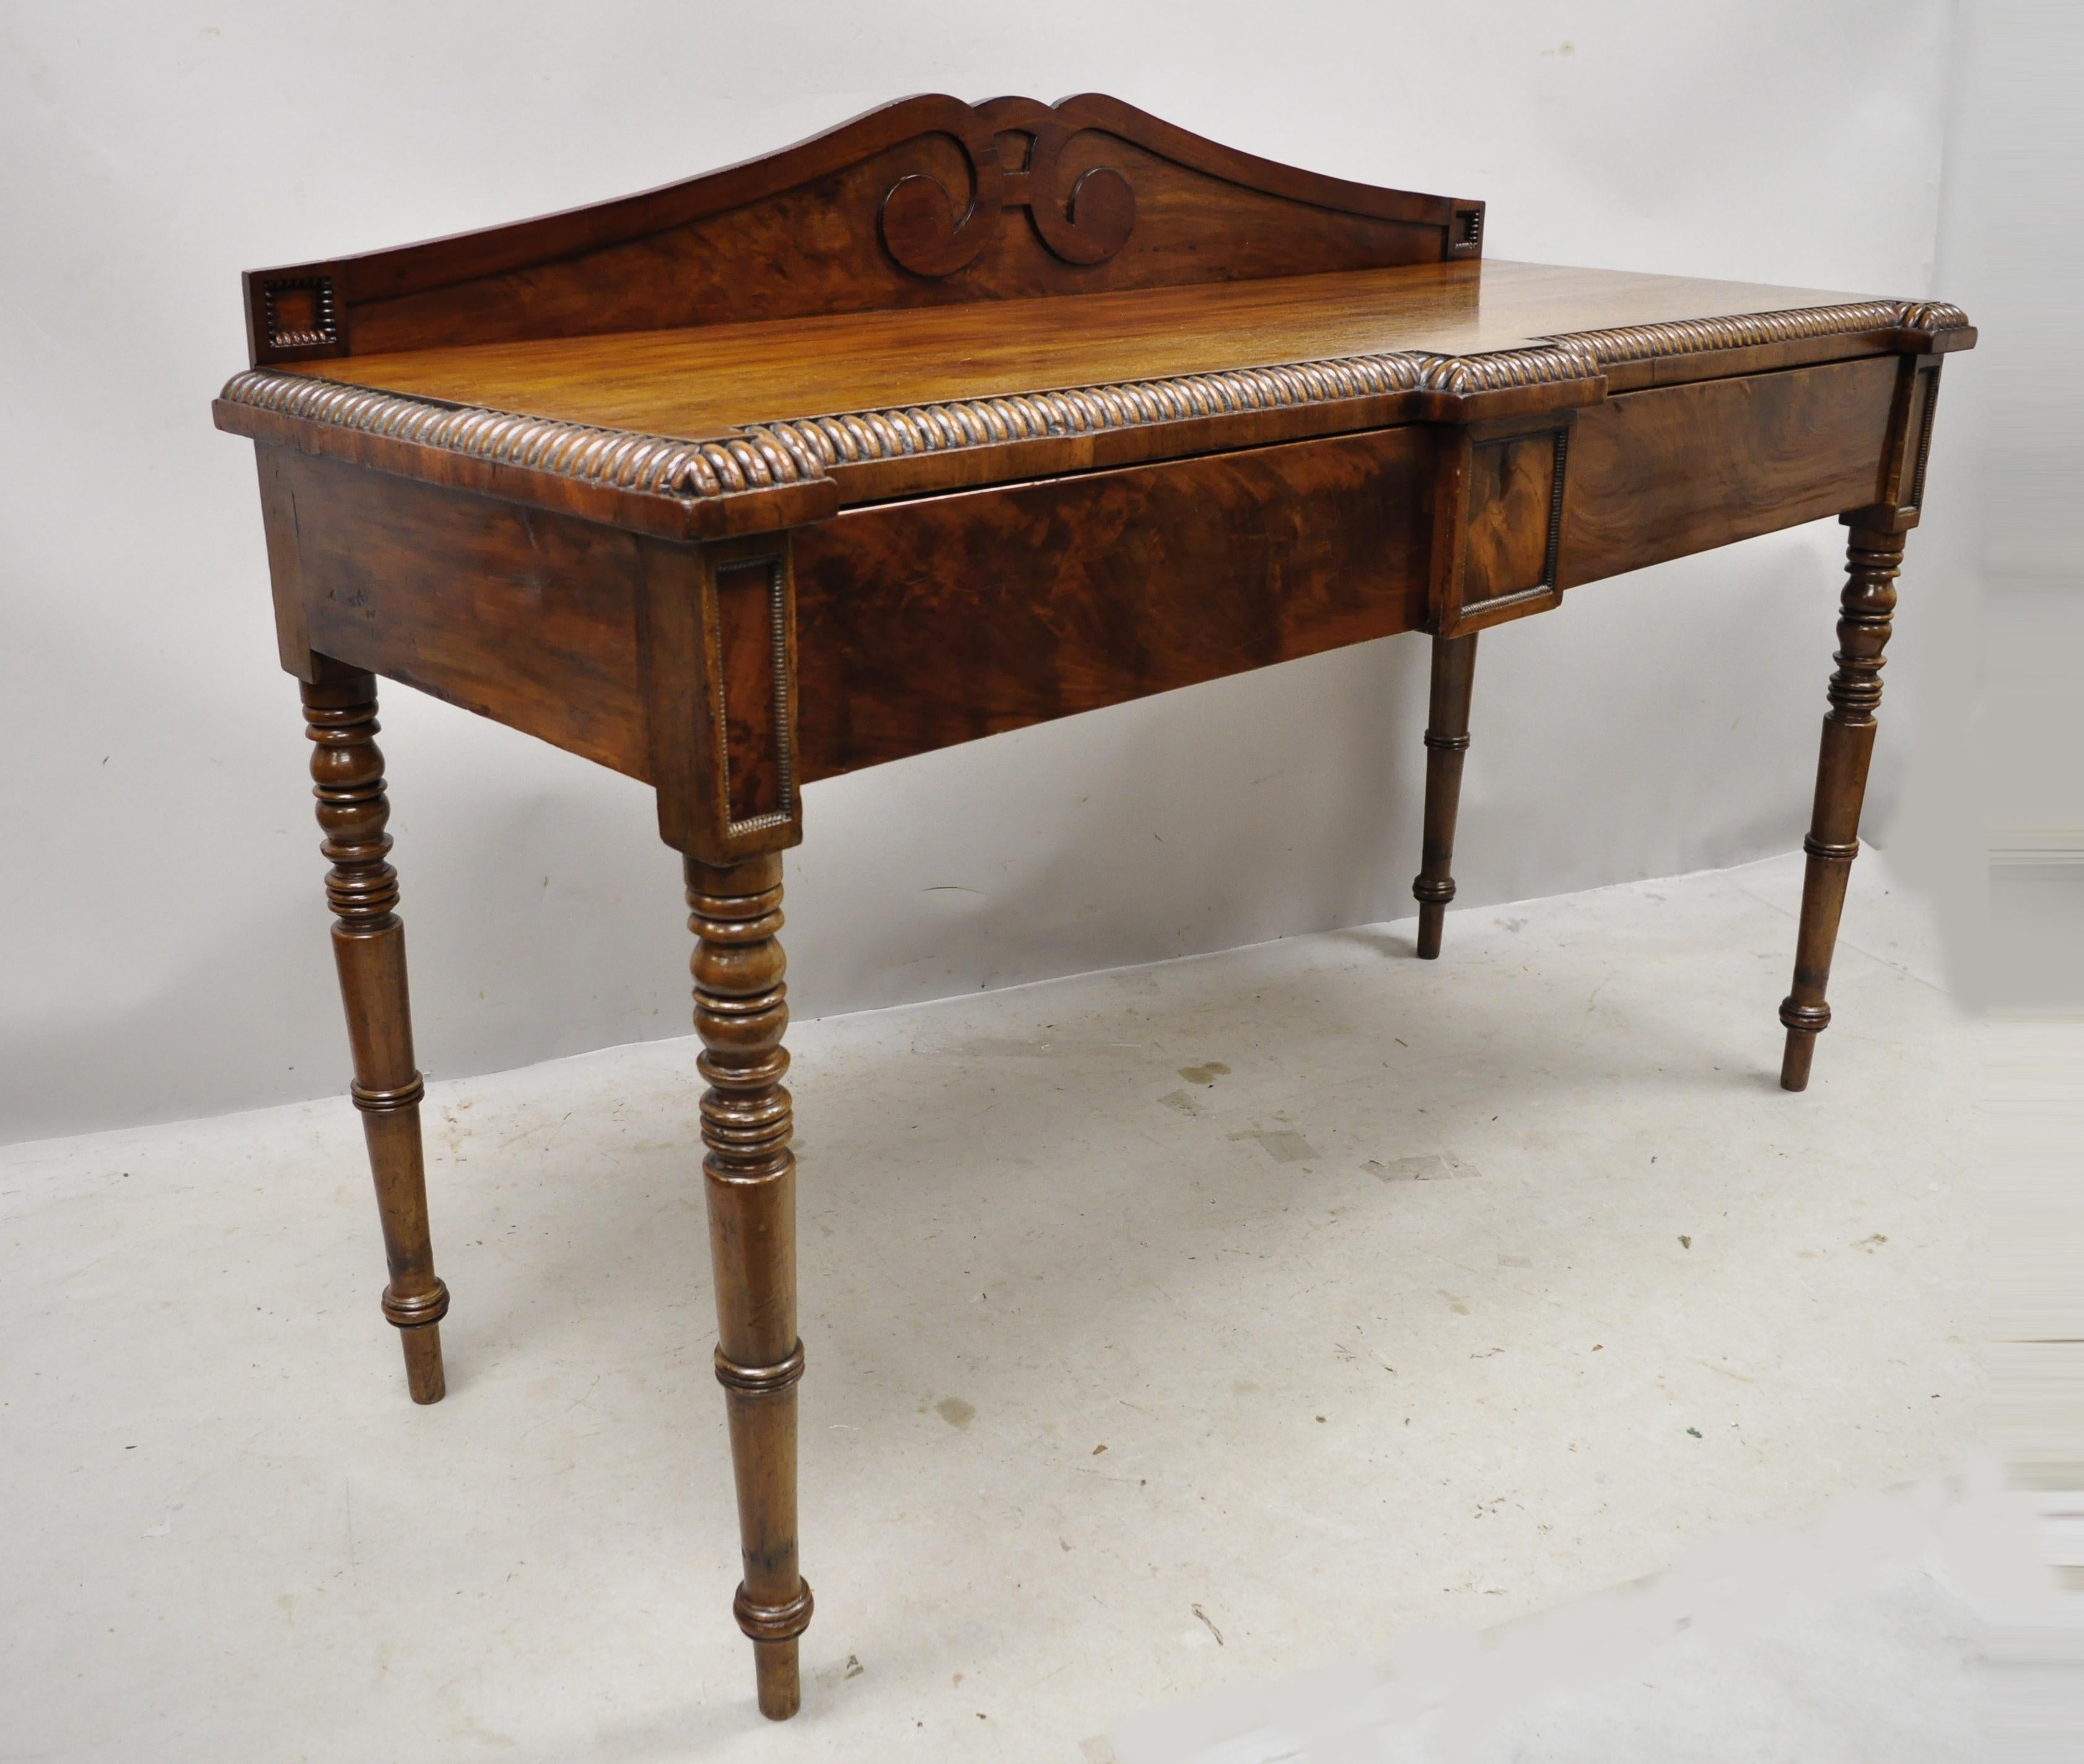 19th century antique English Regency crotch mahogany rope carved sideboard console table with backsplash. Item features 2 drawers, turn carved legs, rope carved edge, carved backsplash, solid wood construction, beautiful wood grain, very nice